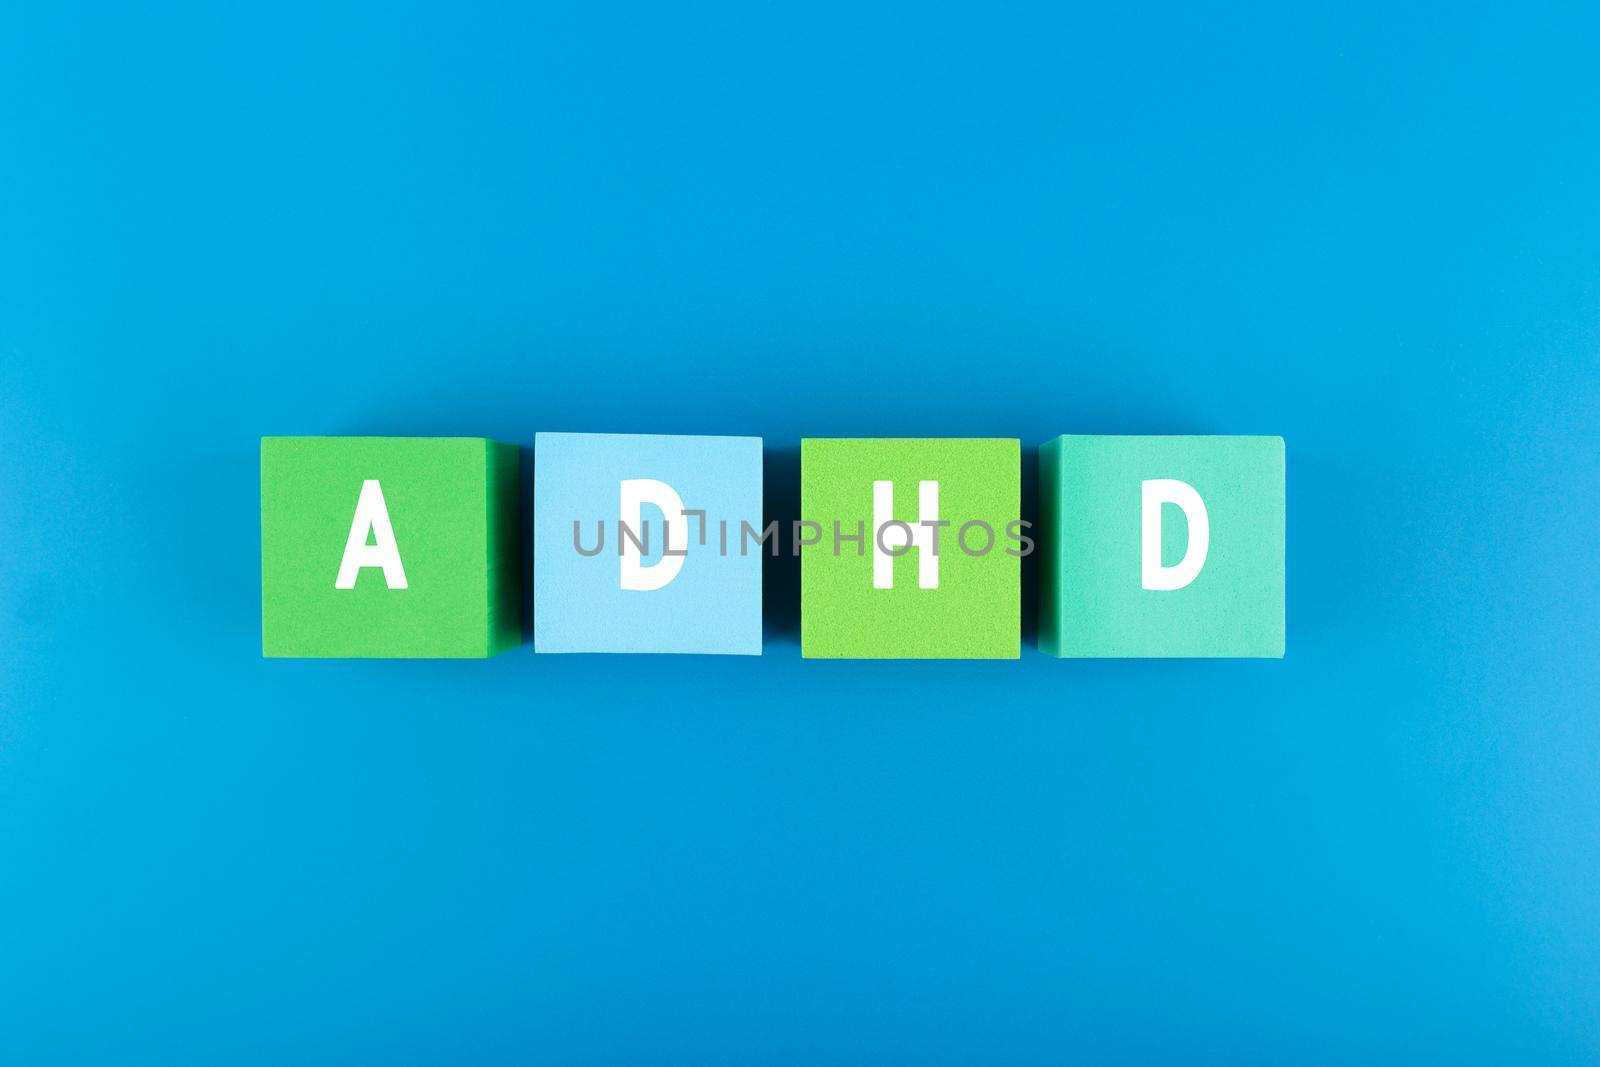 Minimal modern concept of Adhd in blue color. Top view of multicolored blocks with written Adhd letters against blue background with light gradient